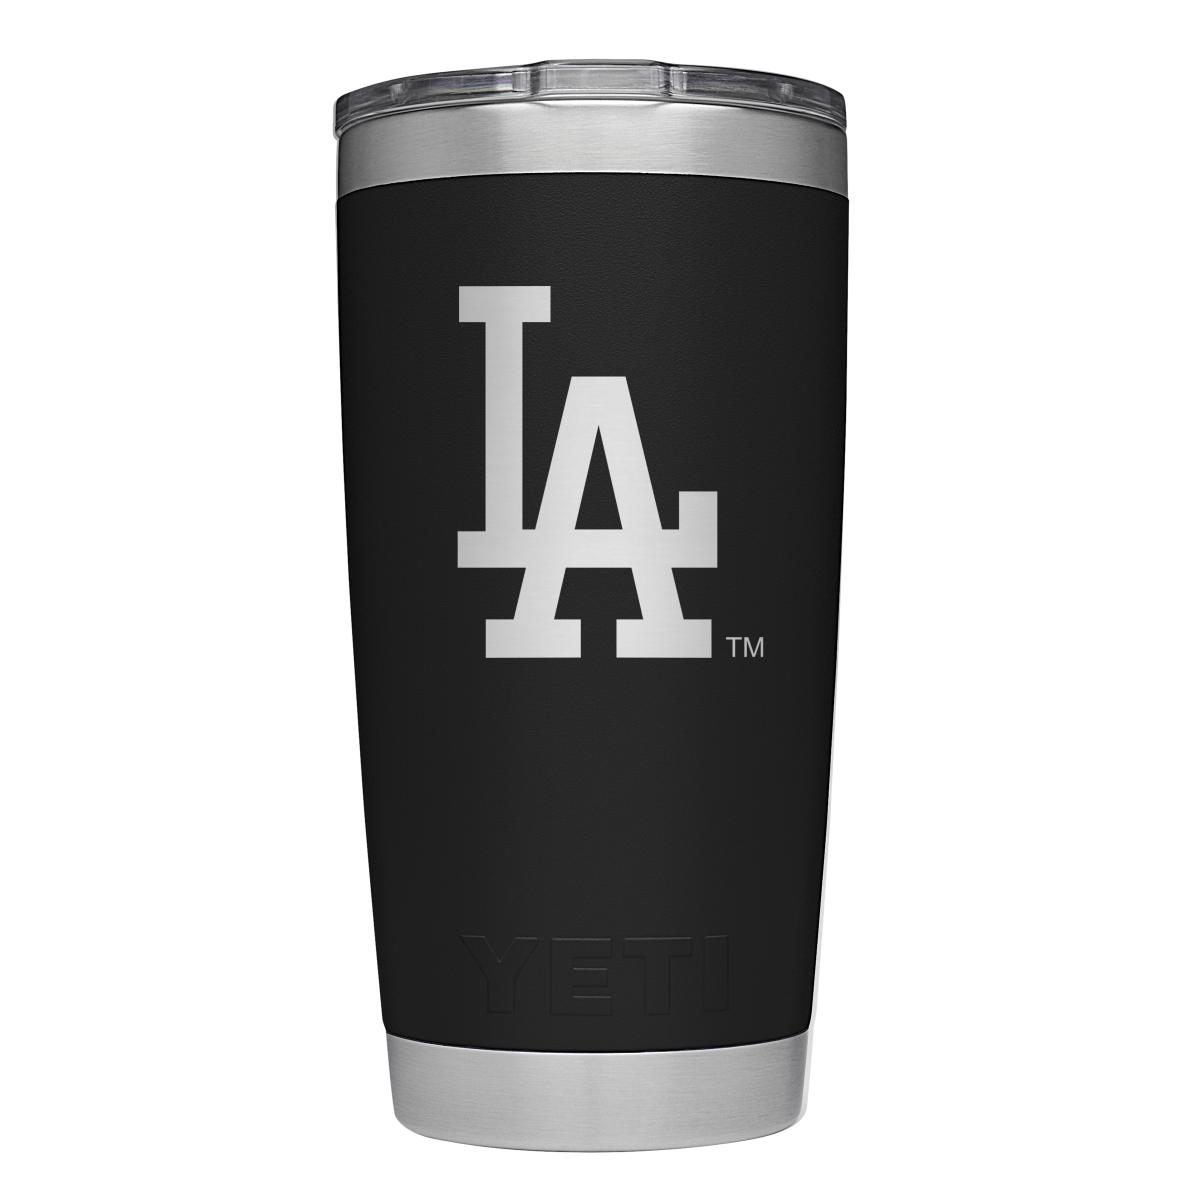 Los Angeles Dodgers YETI Coolers and Drinkware, where to buy Dodgers YETI  gear now - FanNation